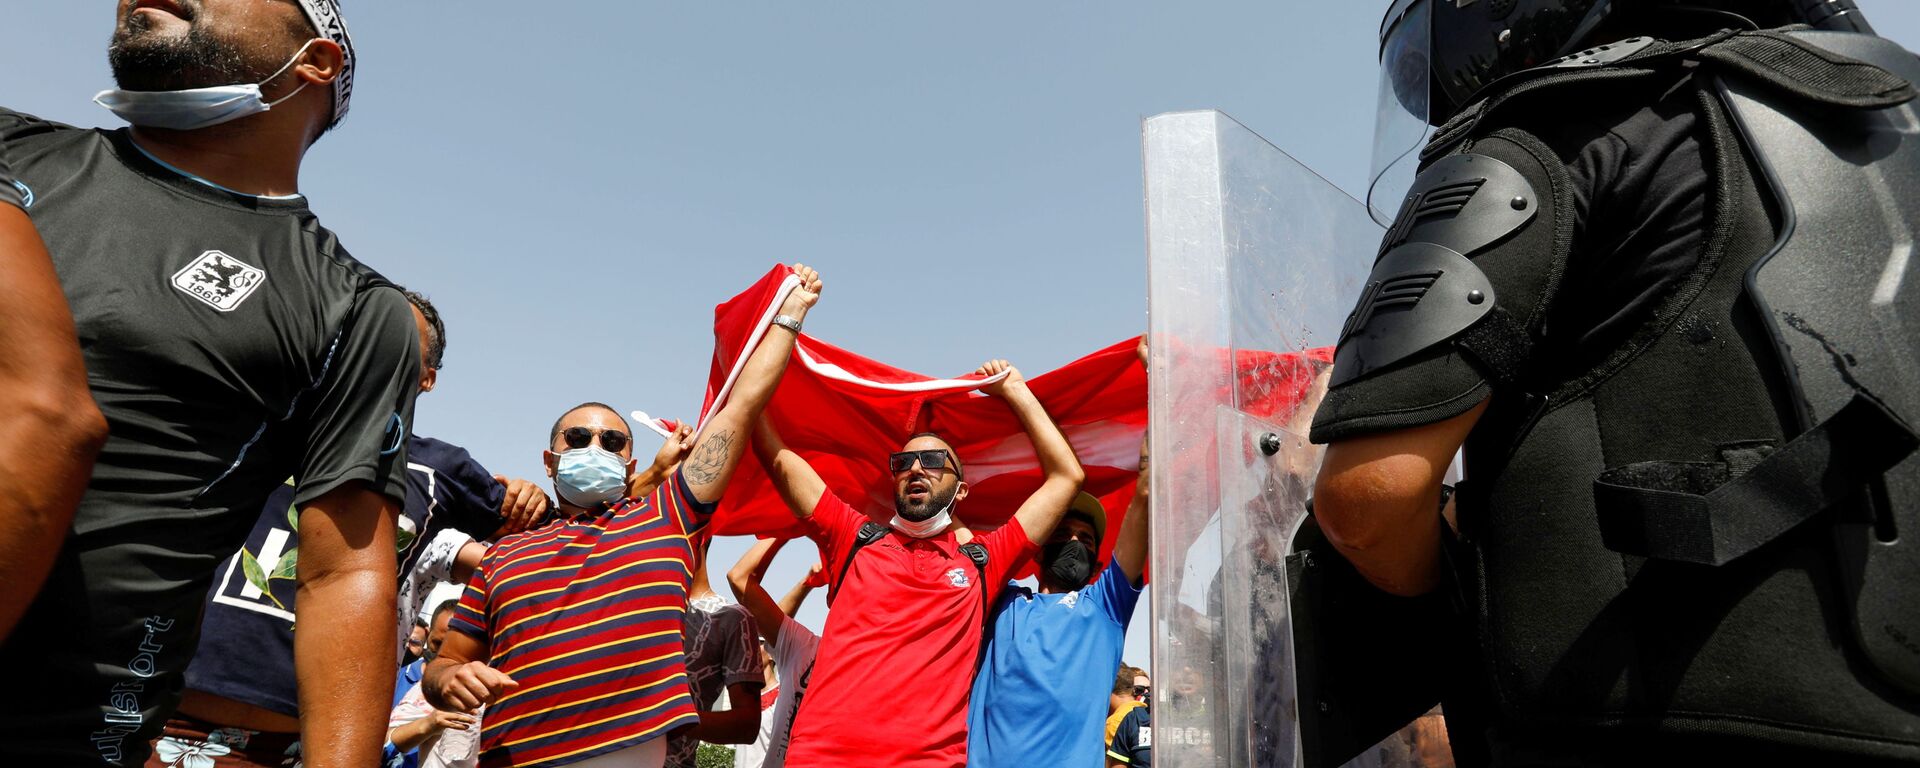 Supporters of Tunisia's President Kais Saied gather as a police officer stands guard near the parliament building in Tunis, Tunisia, July 26, 2021. - Sputnik International, 1920, 26.07.2021